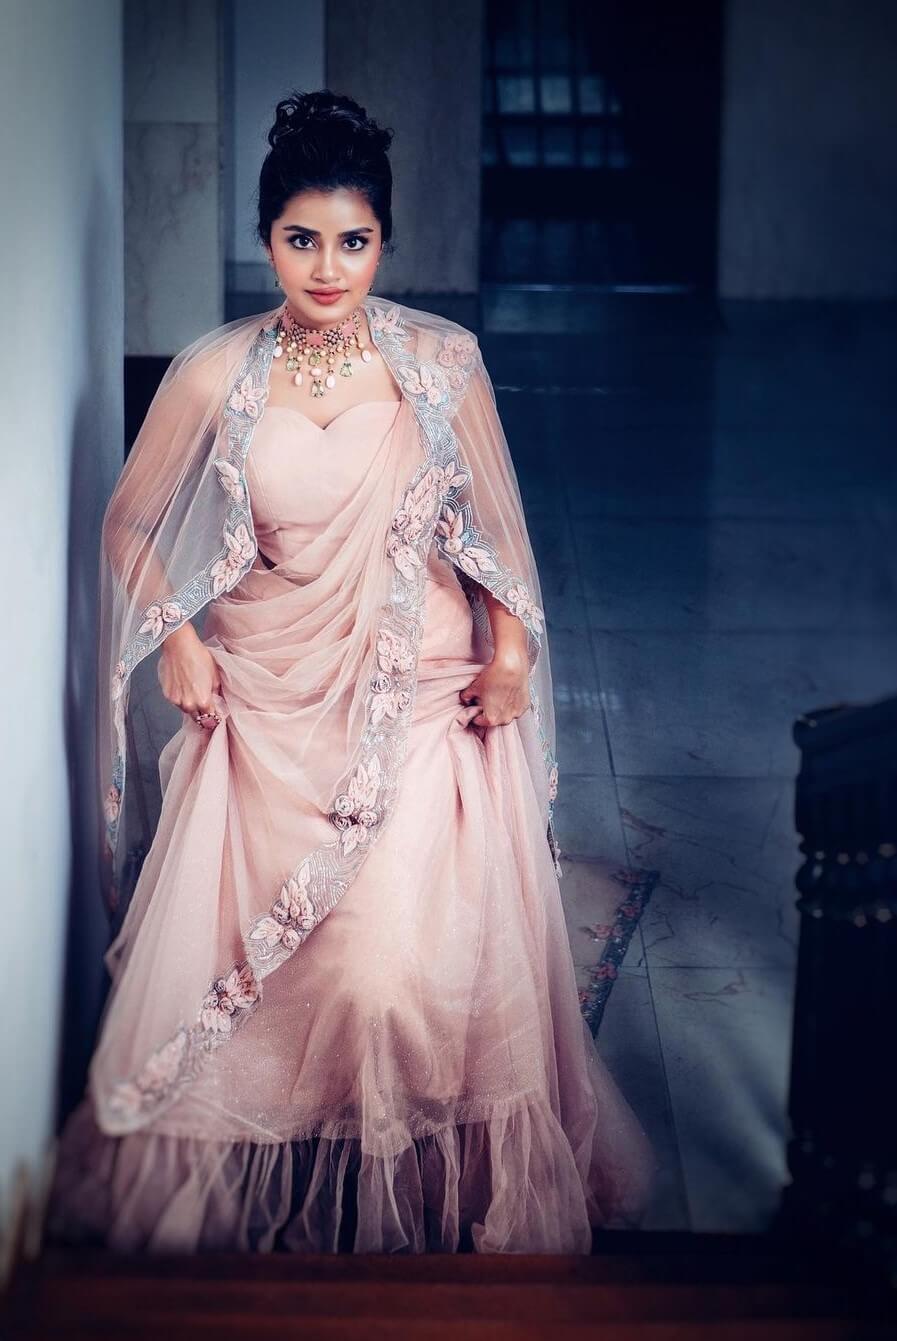 Anupama Look Cute In Pink Gown Outfit Anupama Parameswaran Ethnic Outfit, Style and Looks